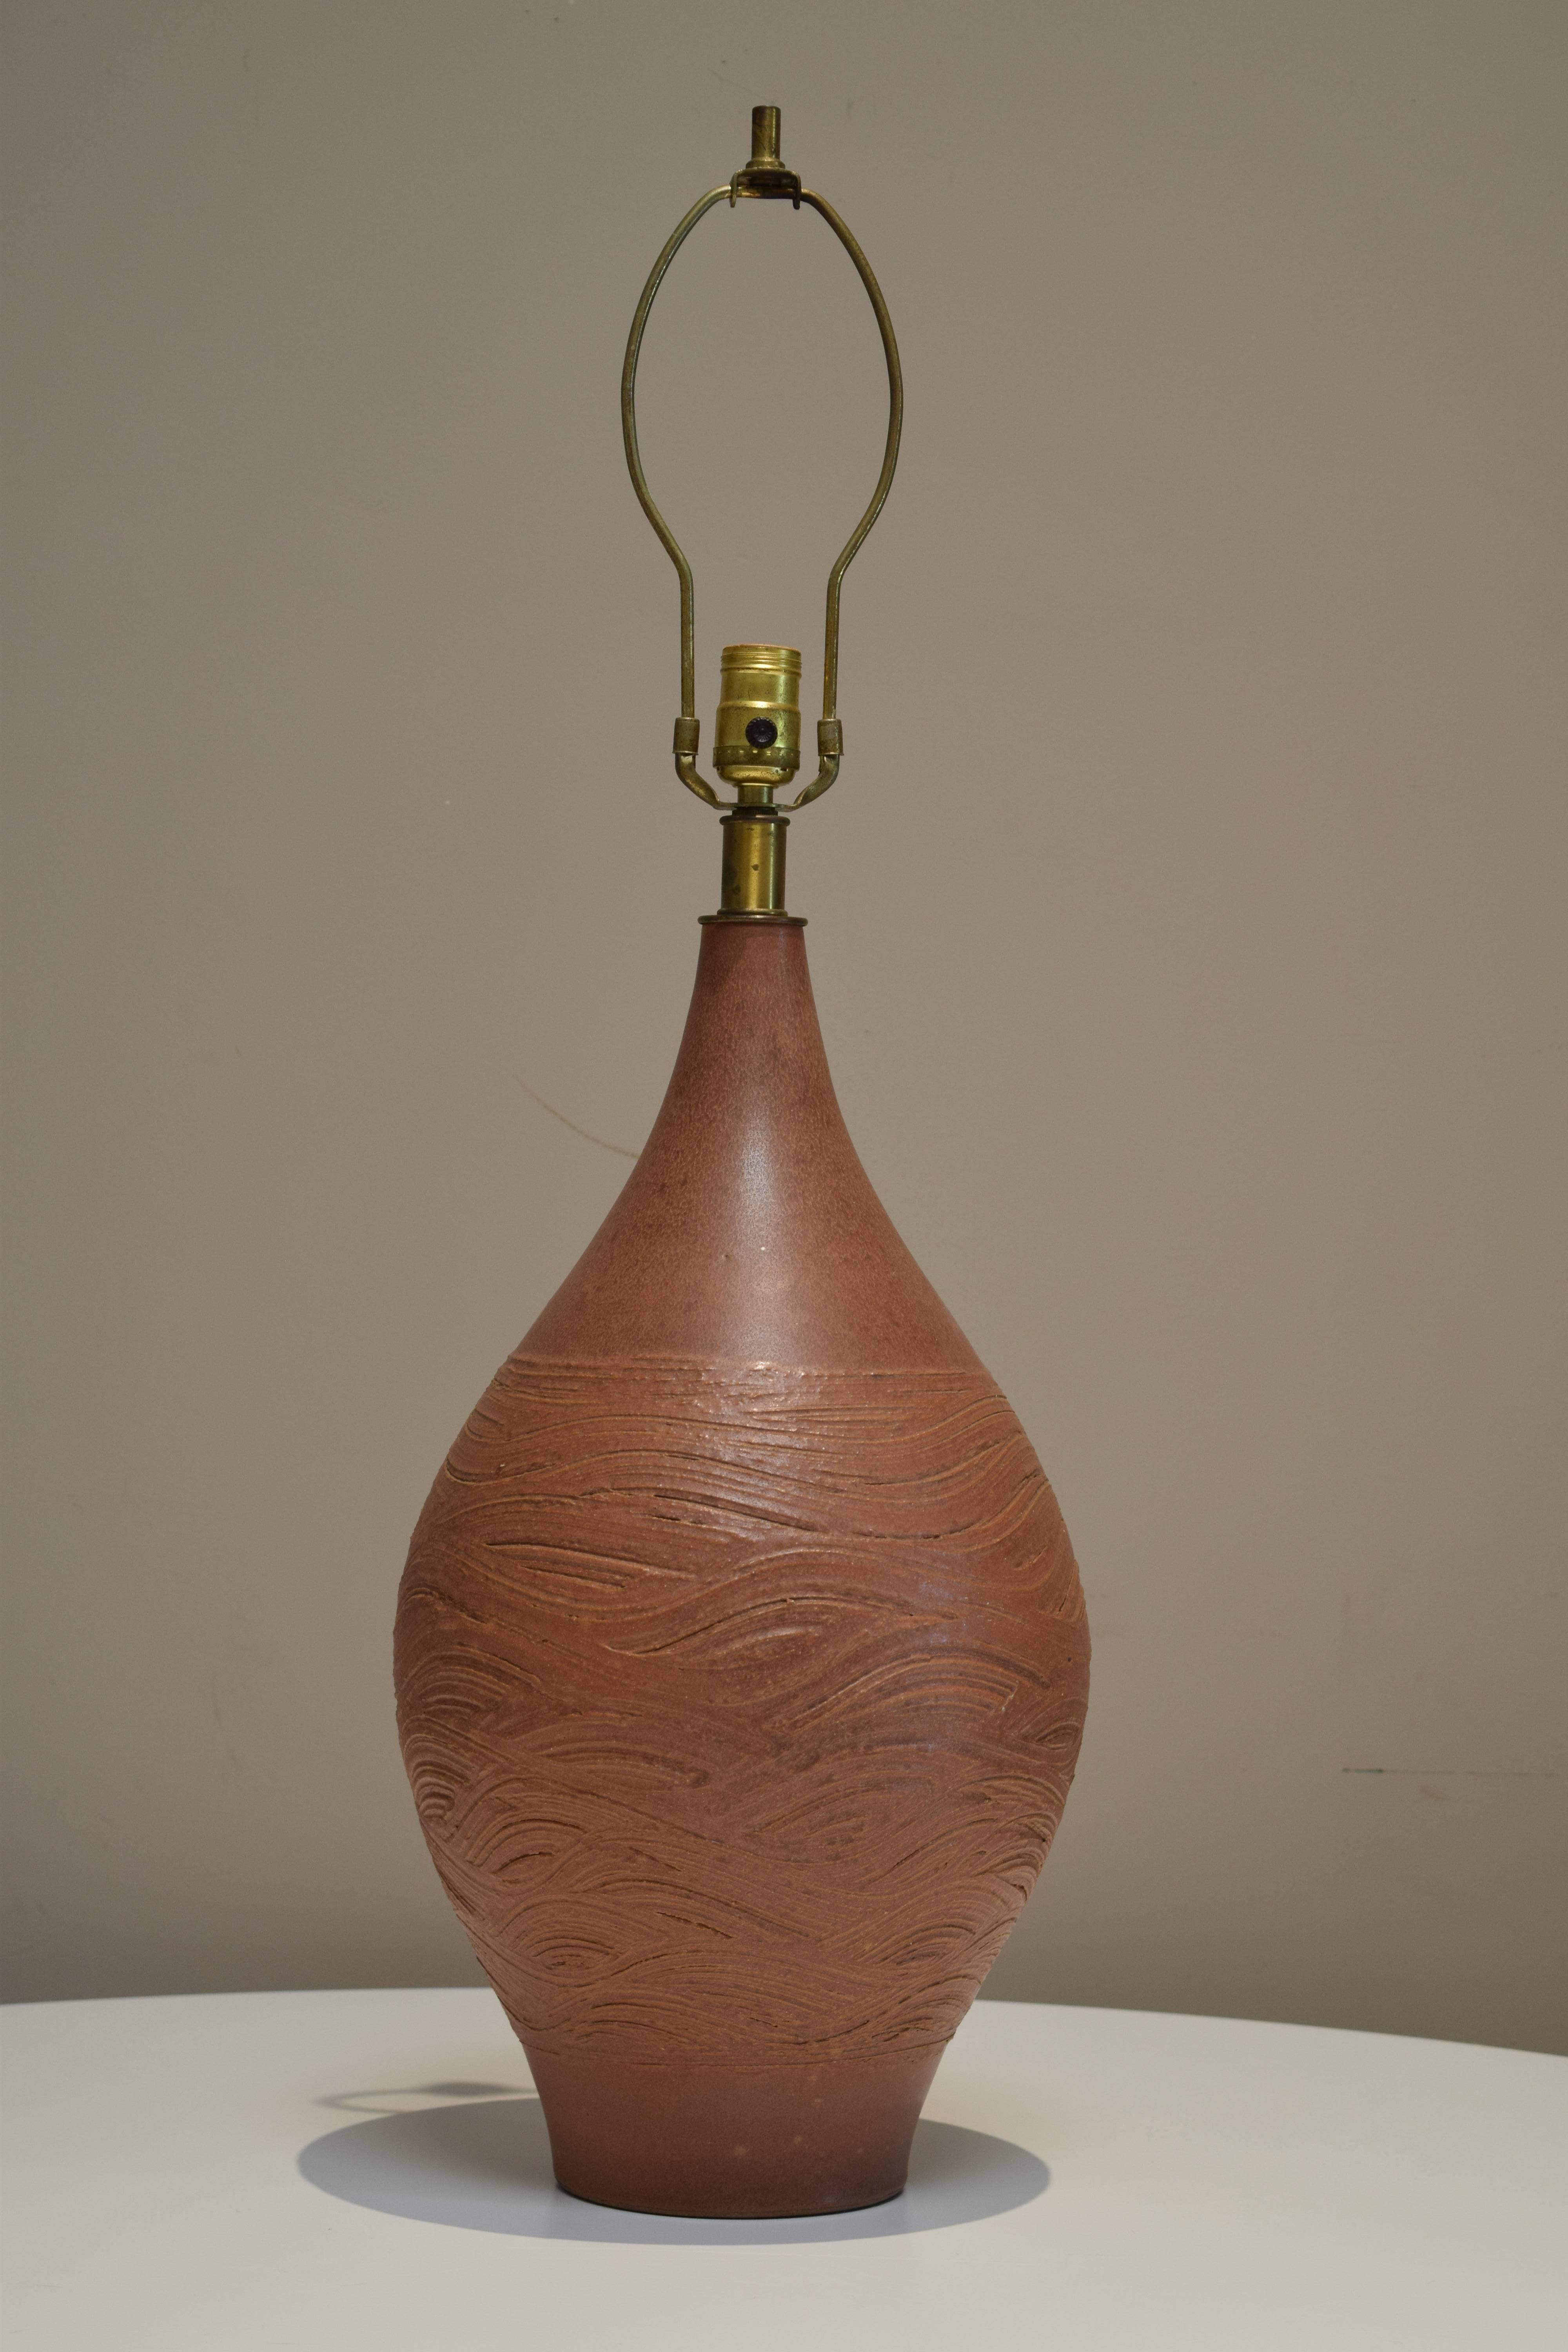 Hand-thrown ceramic lamp in a matte burnt sienna glaze with rich, textural detail. Exemplary design by Lee Rosen for Design Technics from the Series 3300. Signed with stamped medallion [DT] at base. Original custom burlap shade included. Please